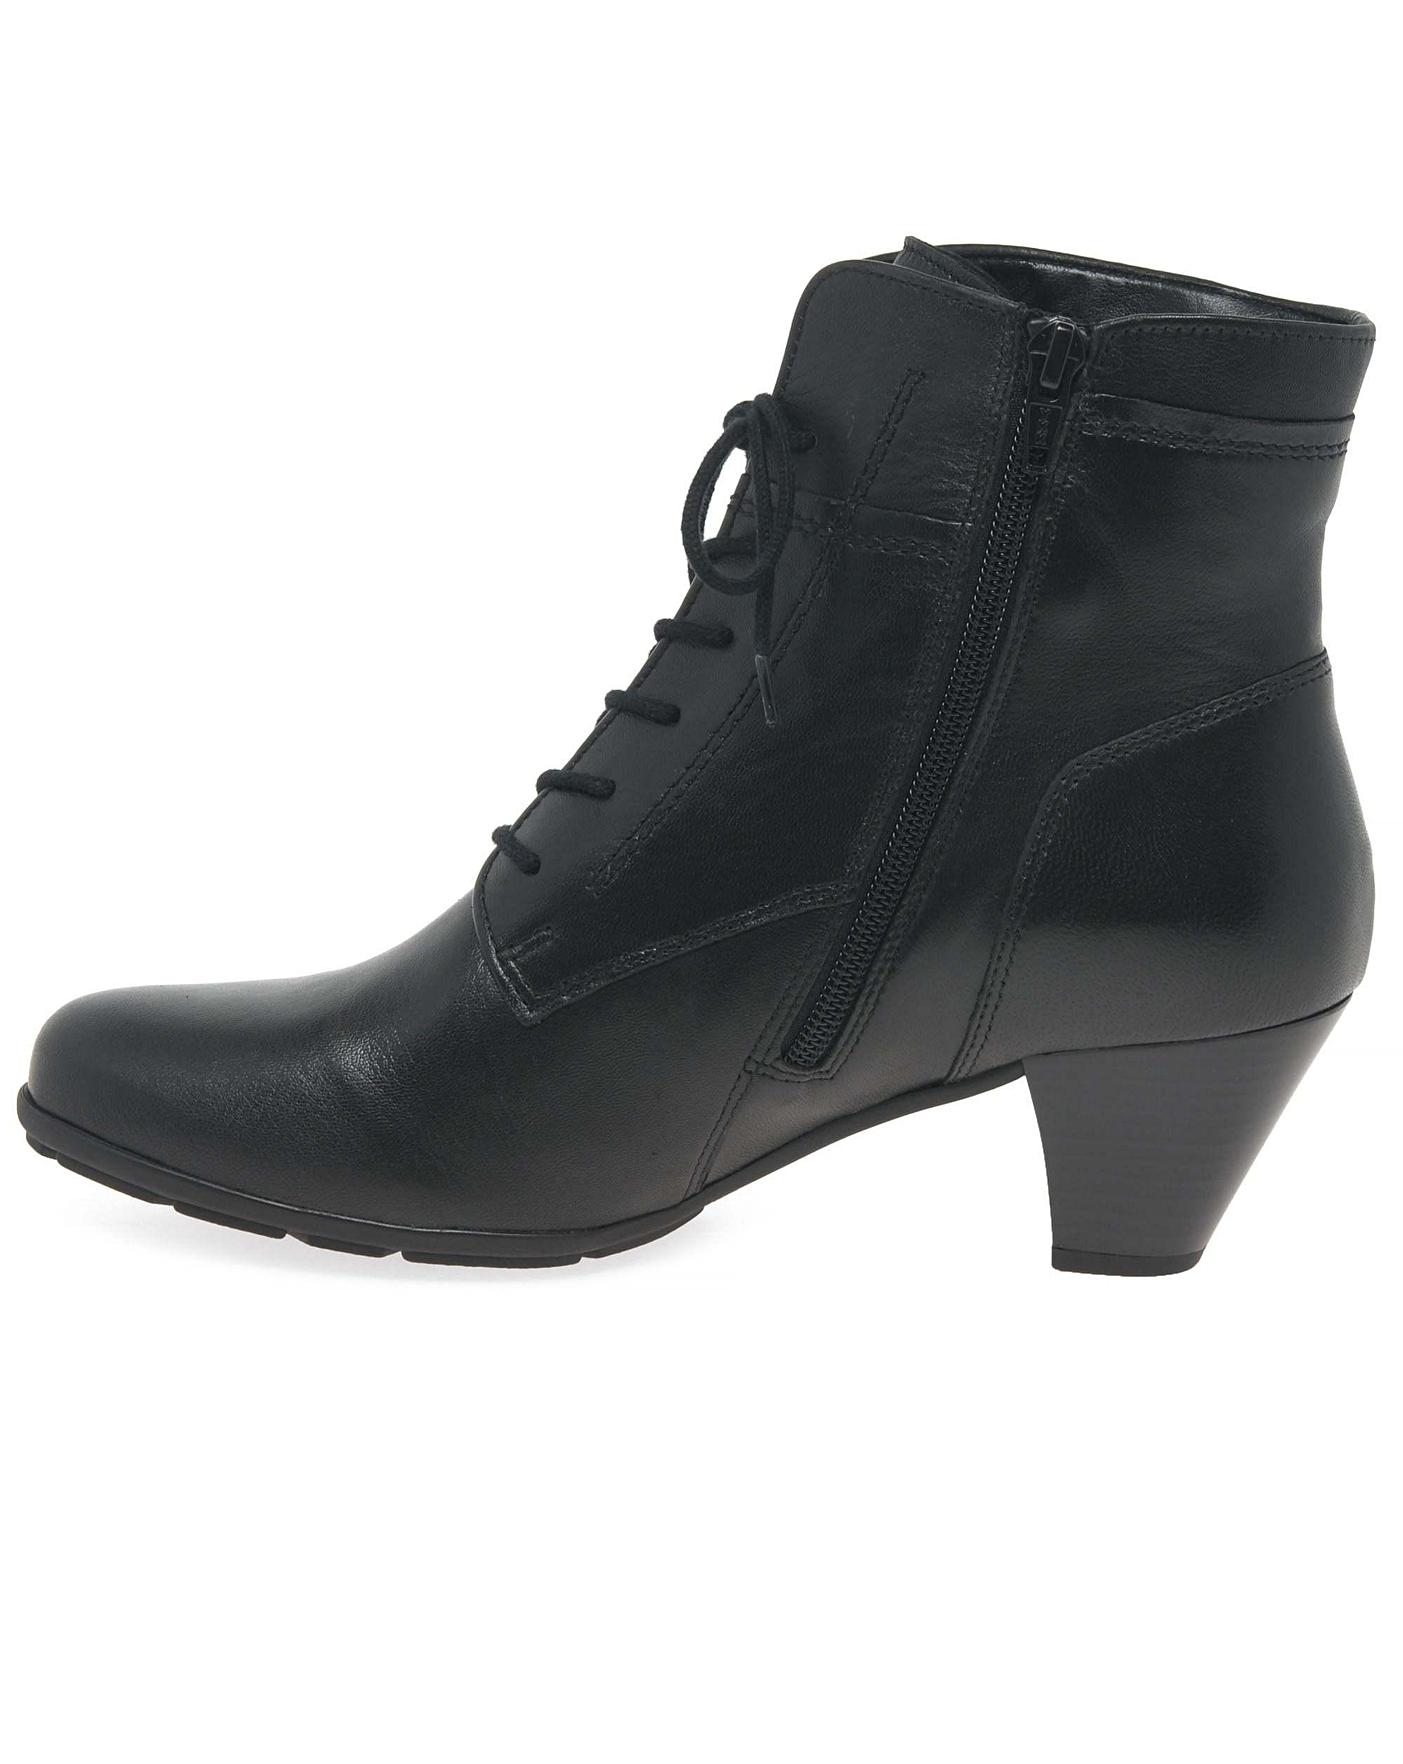 Gabor National Standard Fit Ankle Boots | Marisota